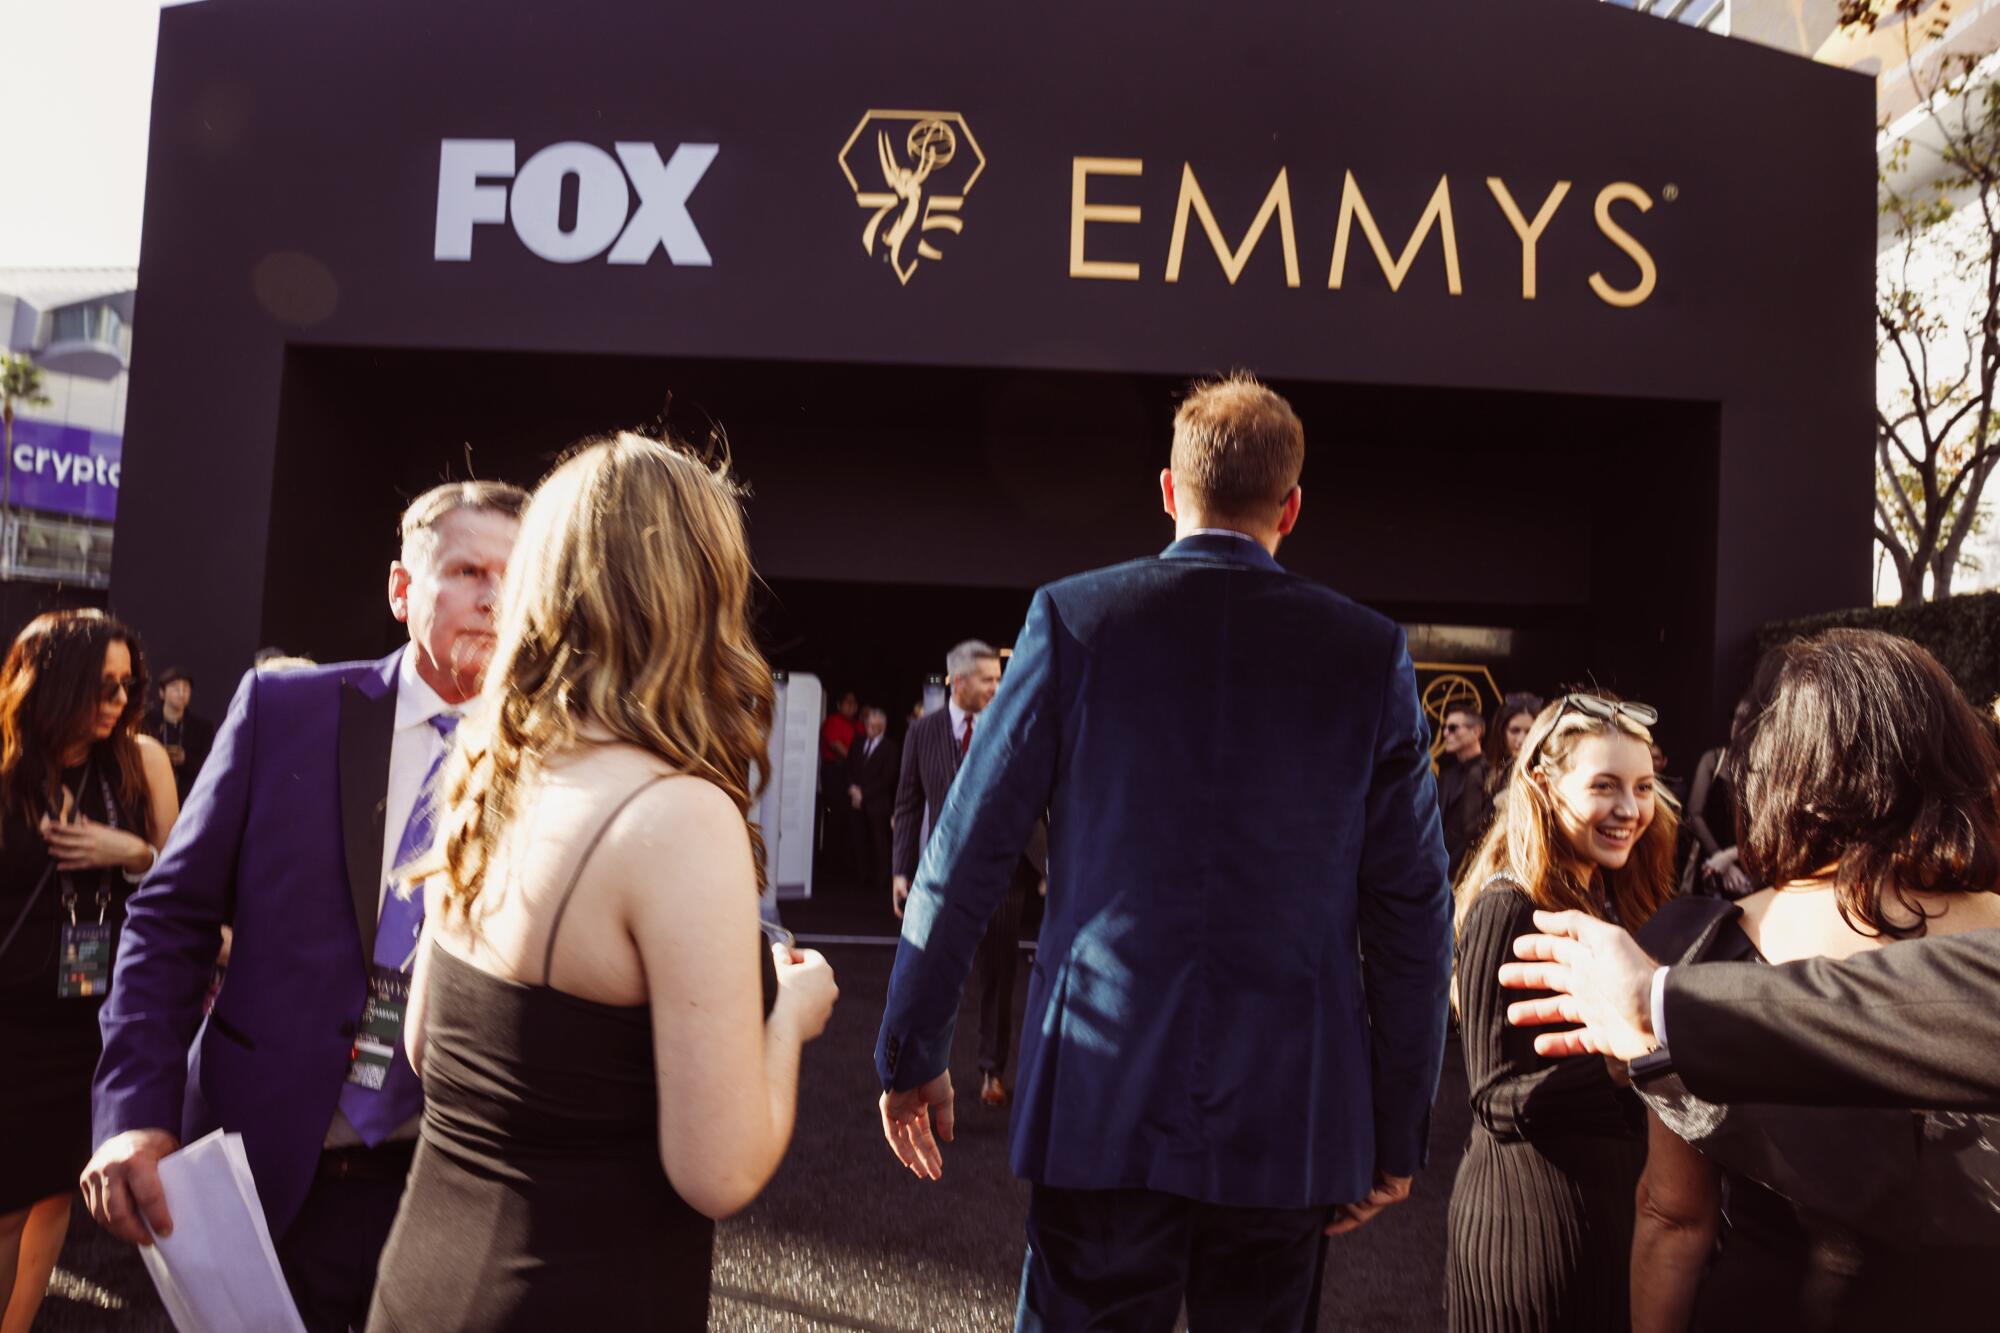 Ronald Gladden approaches the Emmys red carpet.